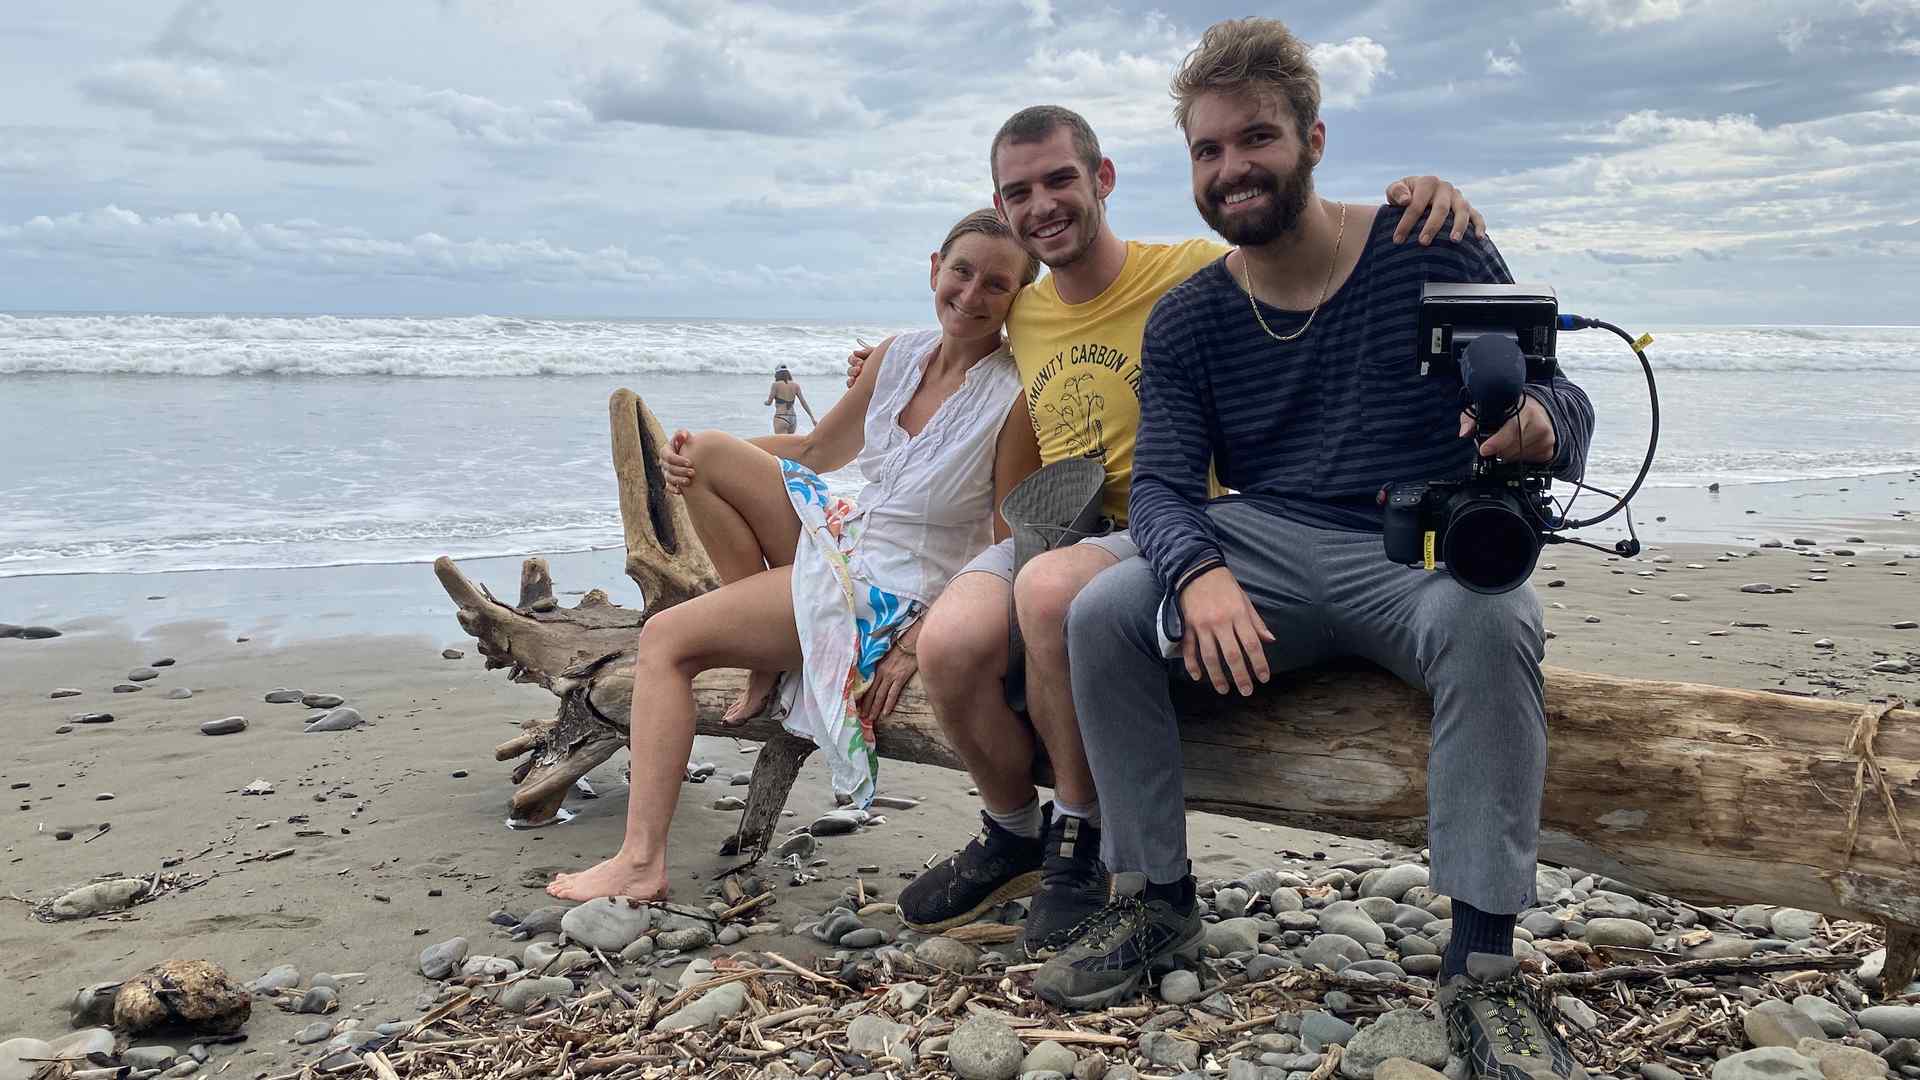 Jennifer Smith, Nathan Hirschaut, and Treyden Chiaravalloti at the shore. They are sitting on a large log of driftwood and Chiaravalloti holds a movie camera on his lap